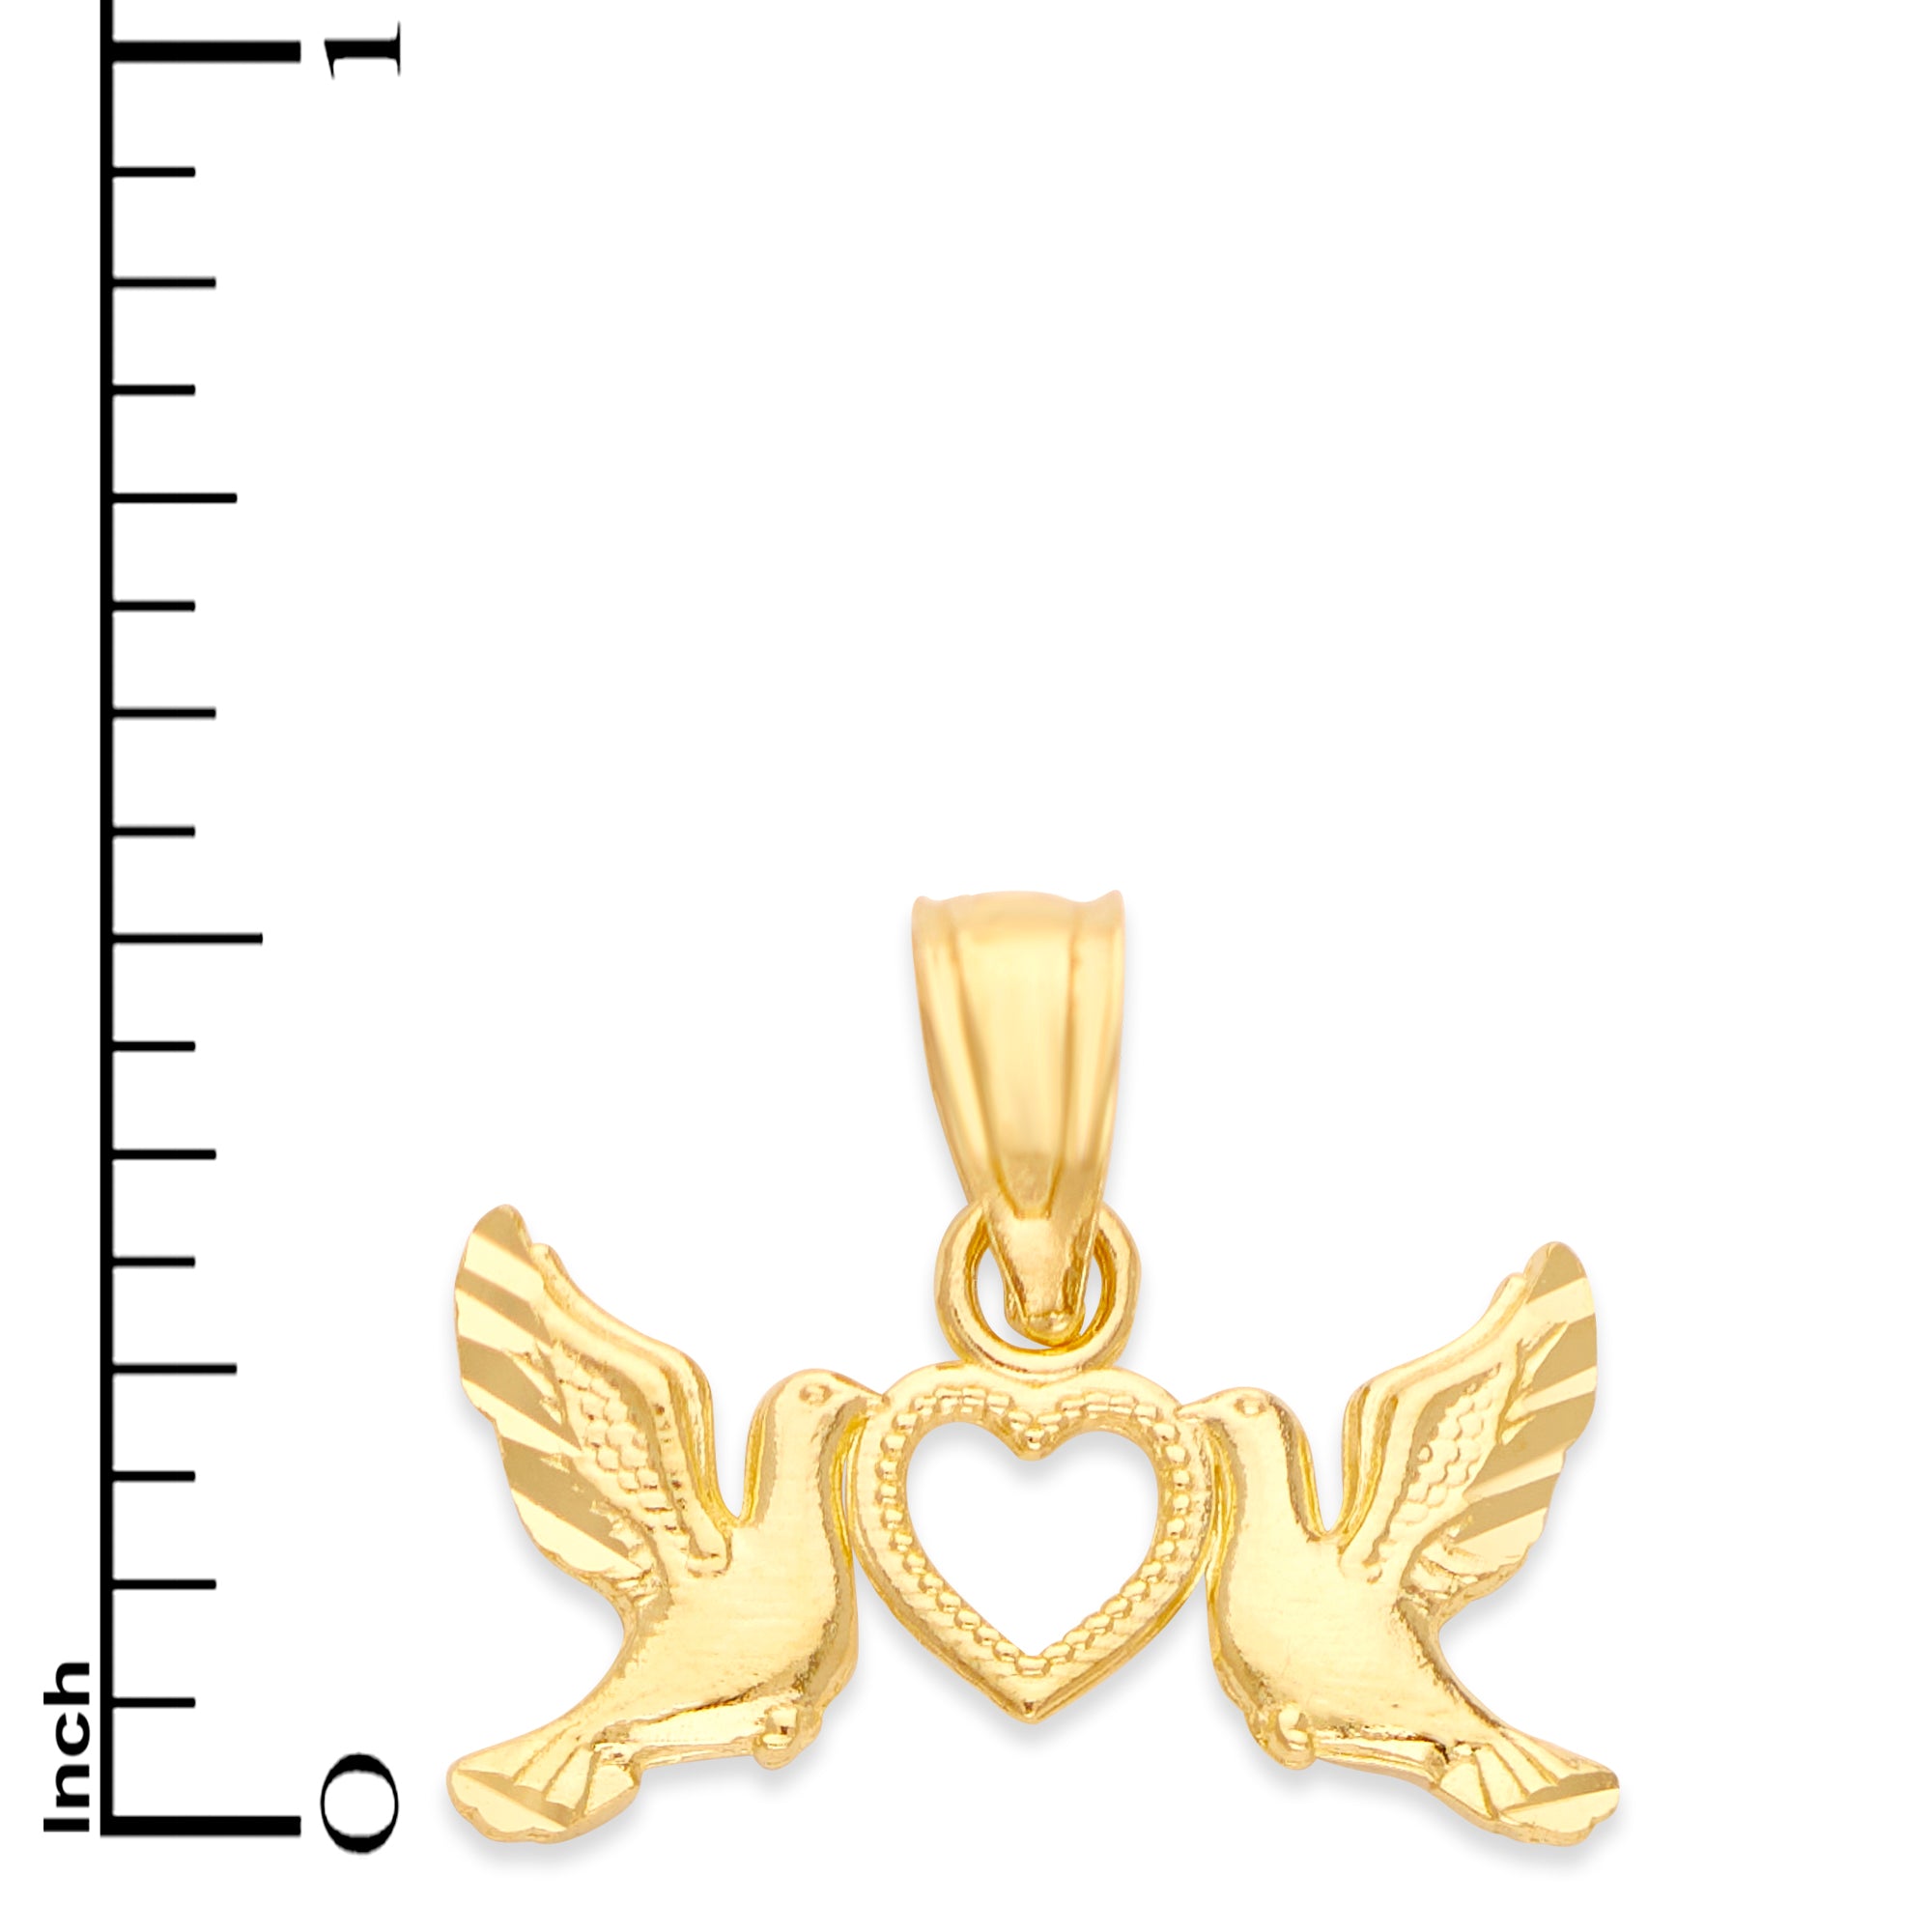 Solid Gold Doves with Heart Pendant - 10k or 14k